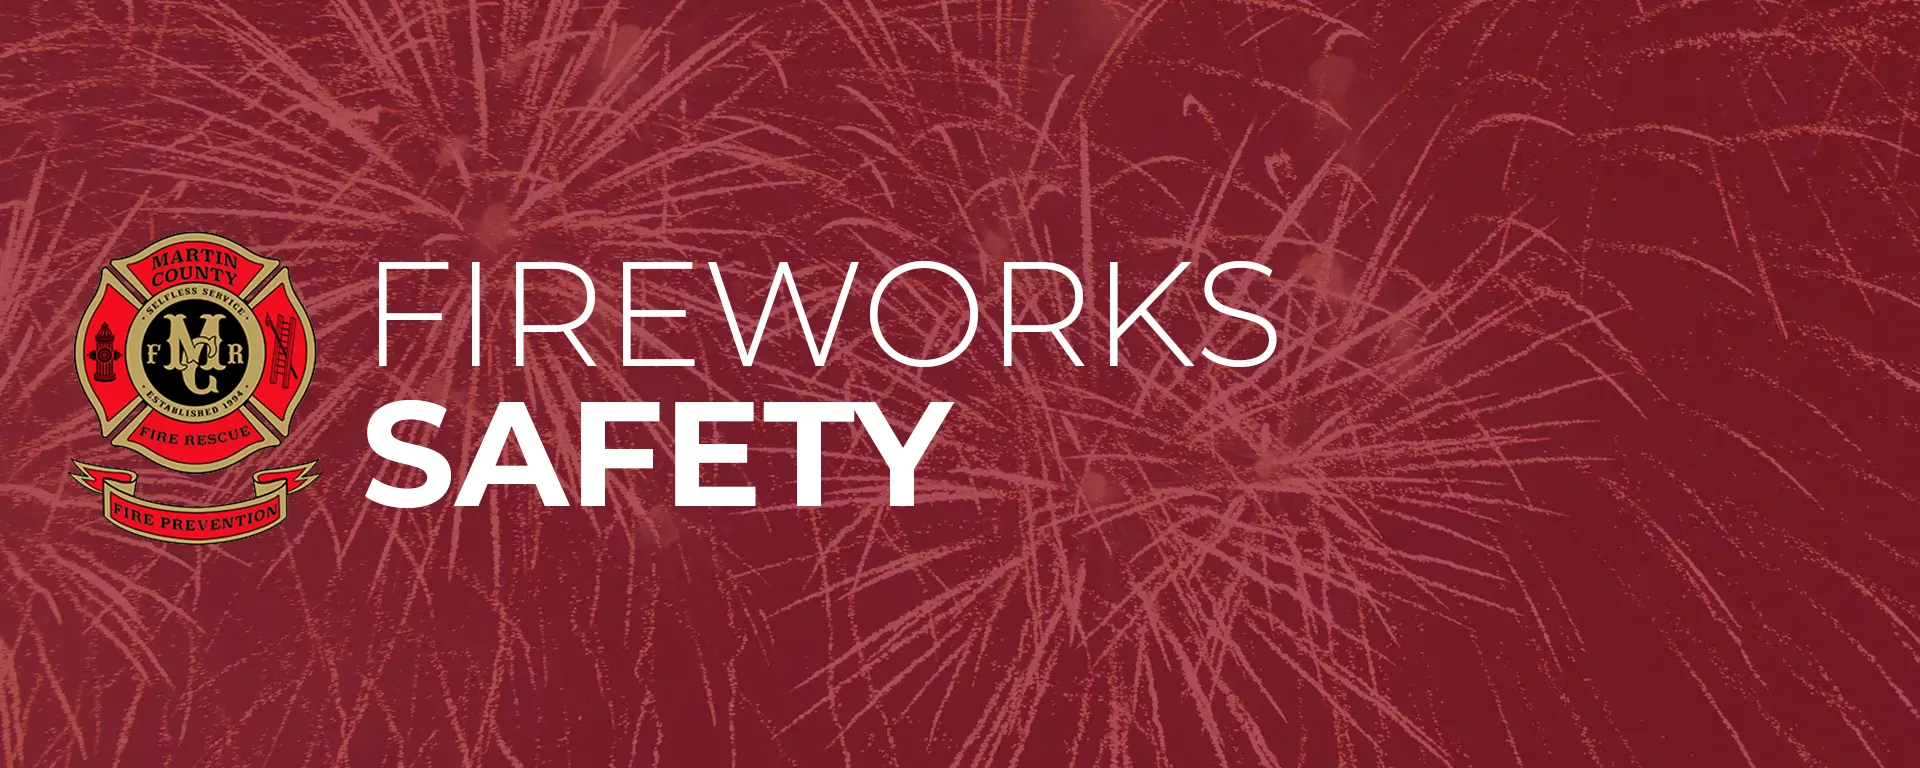 Fireworks Safety and Martin County Fire Rescue Fire Prevention Logo